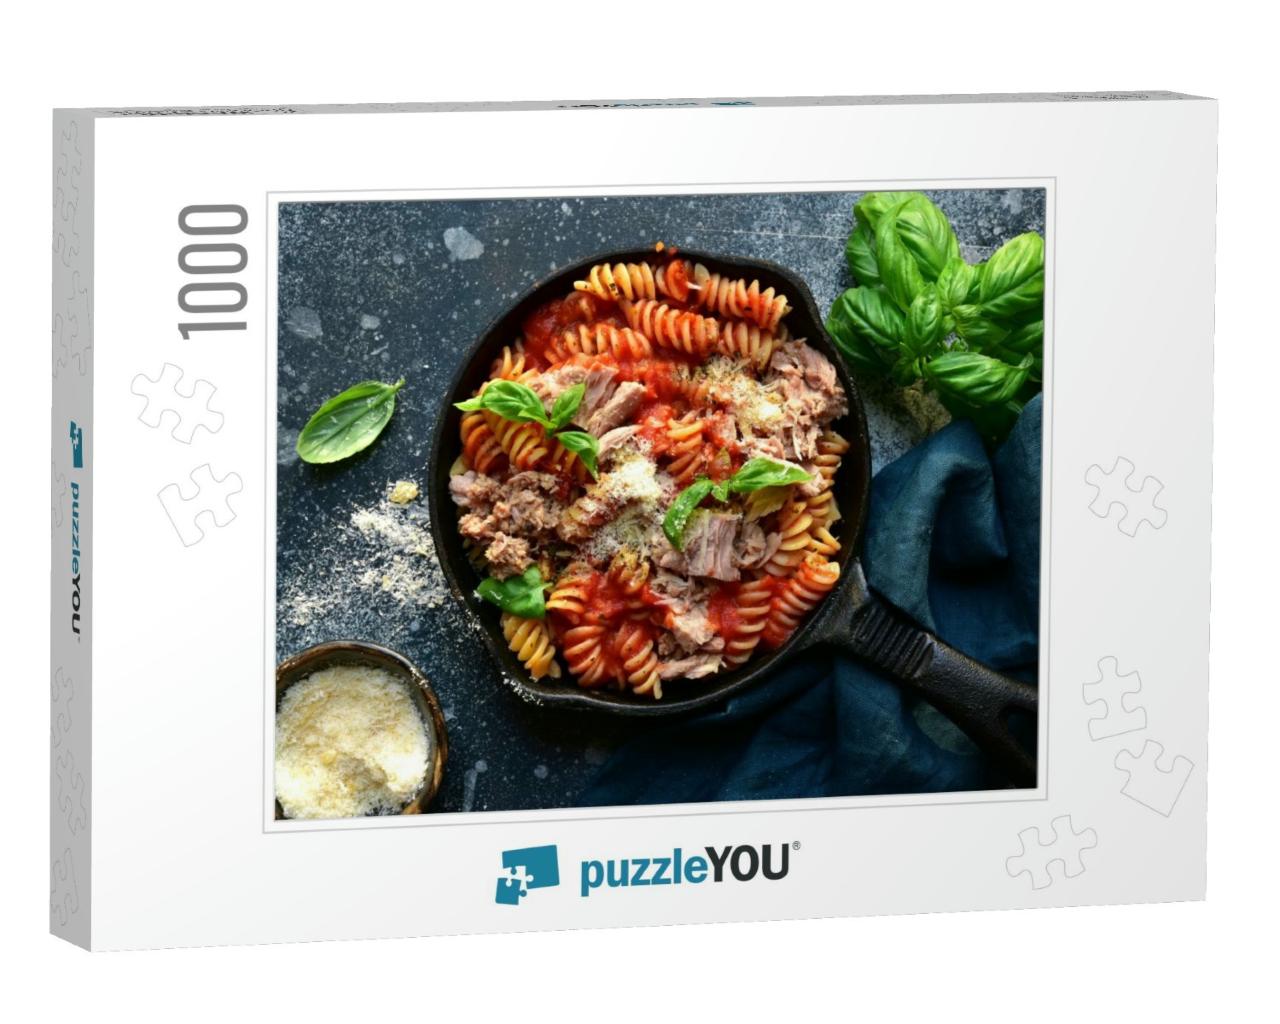 Fusilli Pasta with Tuna in Tomato Sauce in a Skillet on a... Jigsaw Puzzle with 1000 pieces